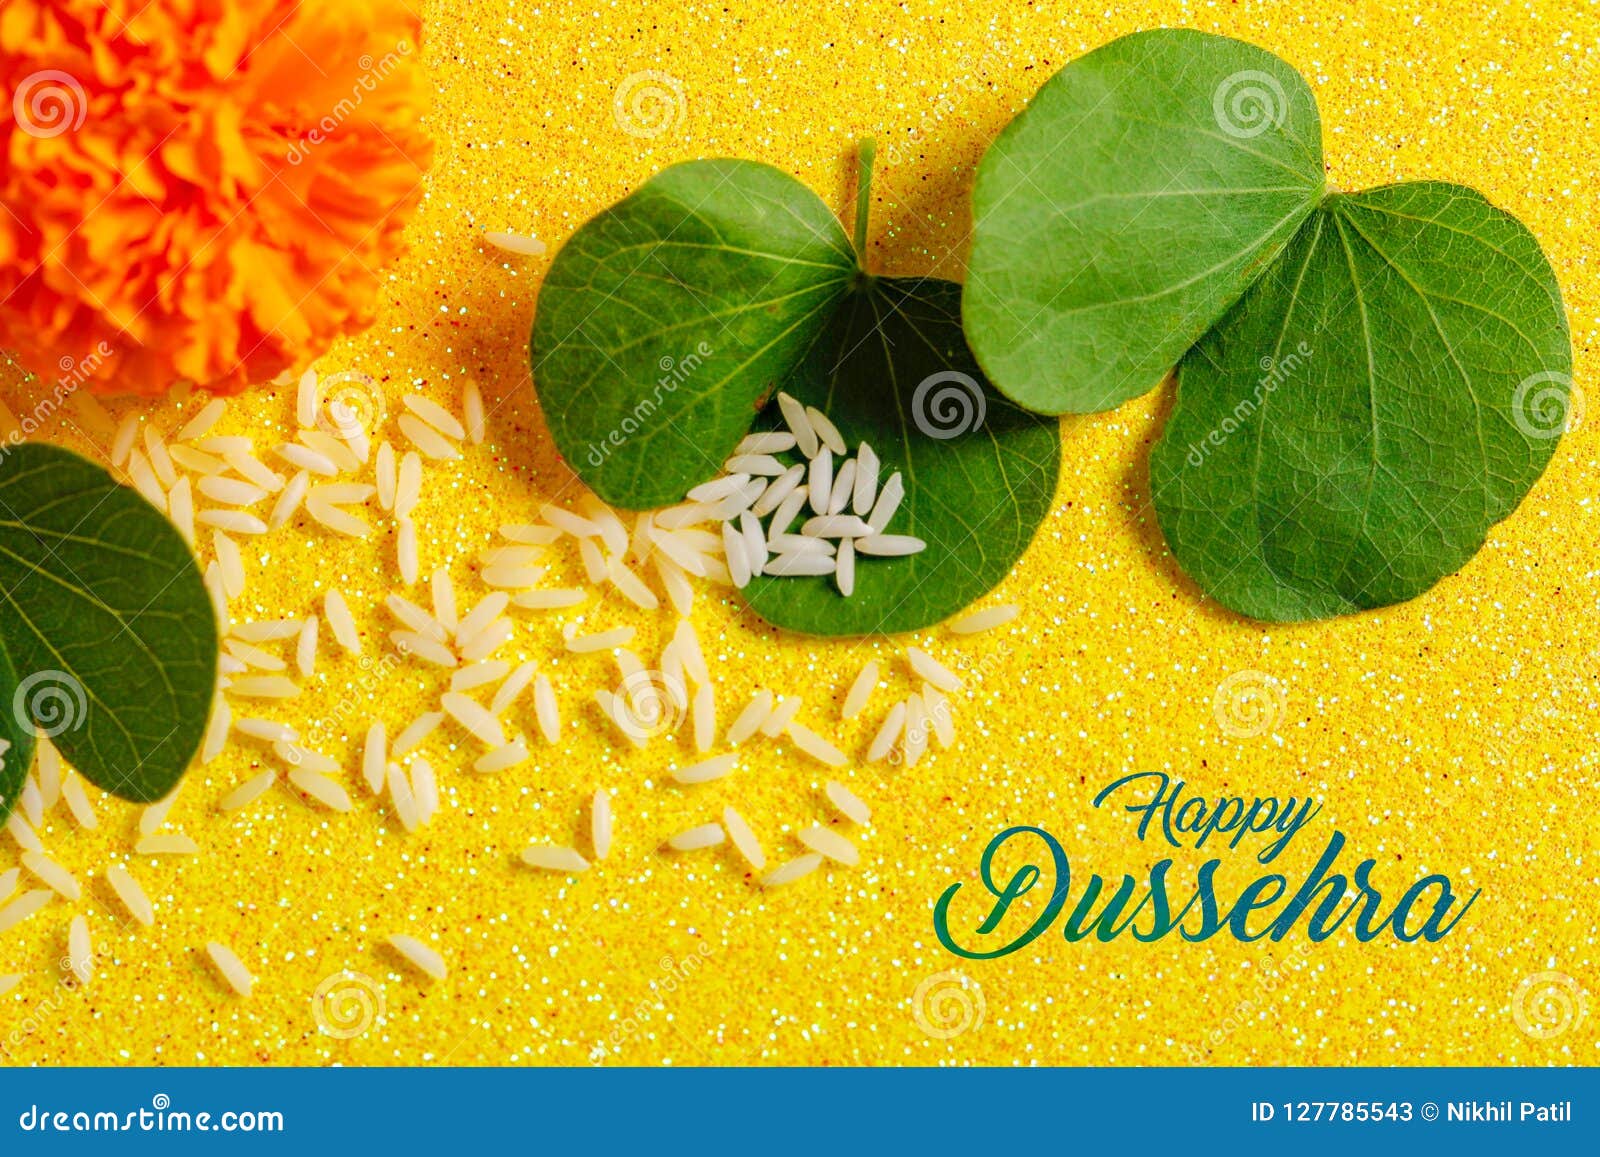 Happy Dussehra Greeting Card , Green Leaf Stock Image - Image of ...